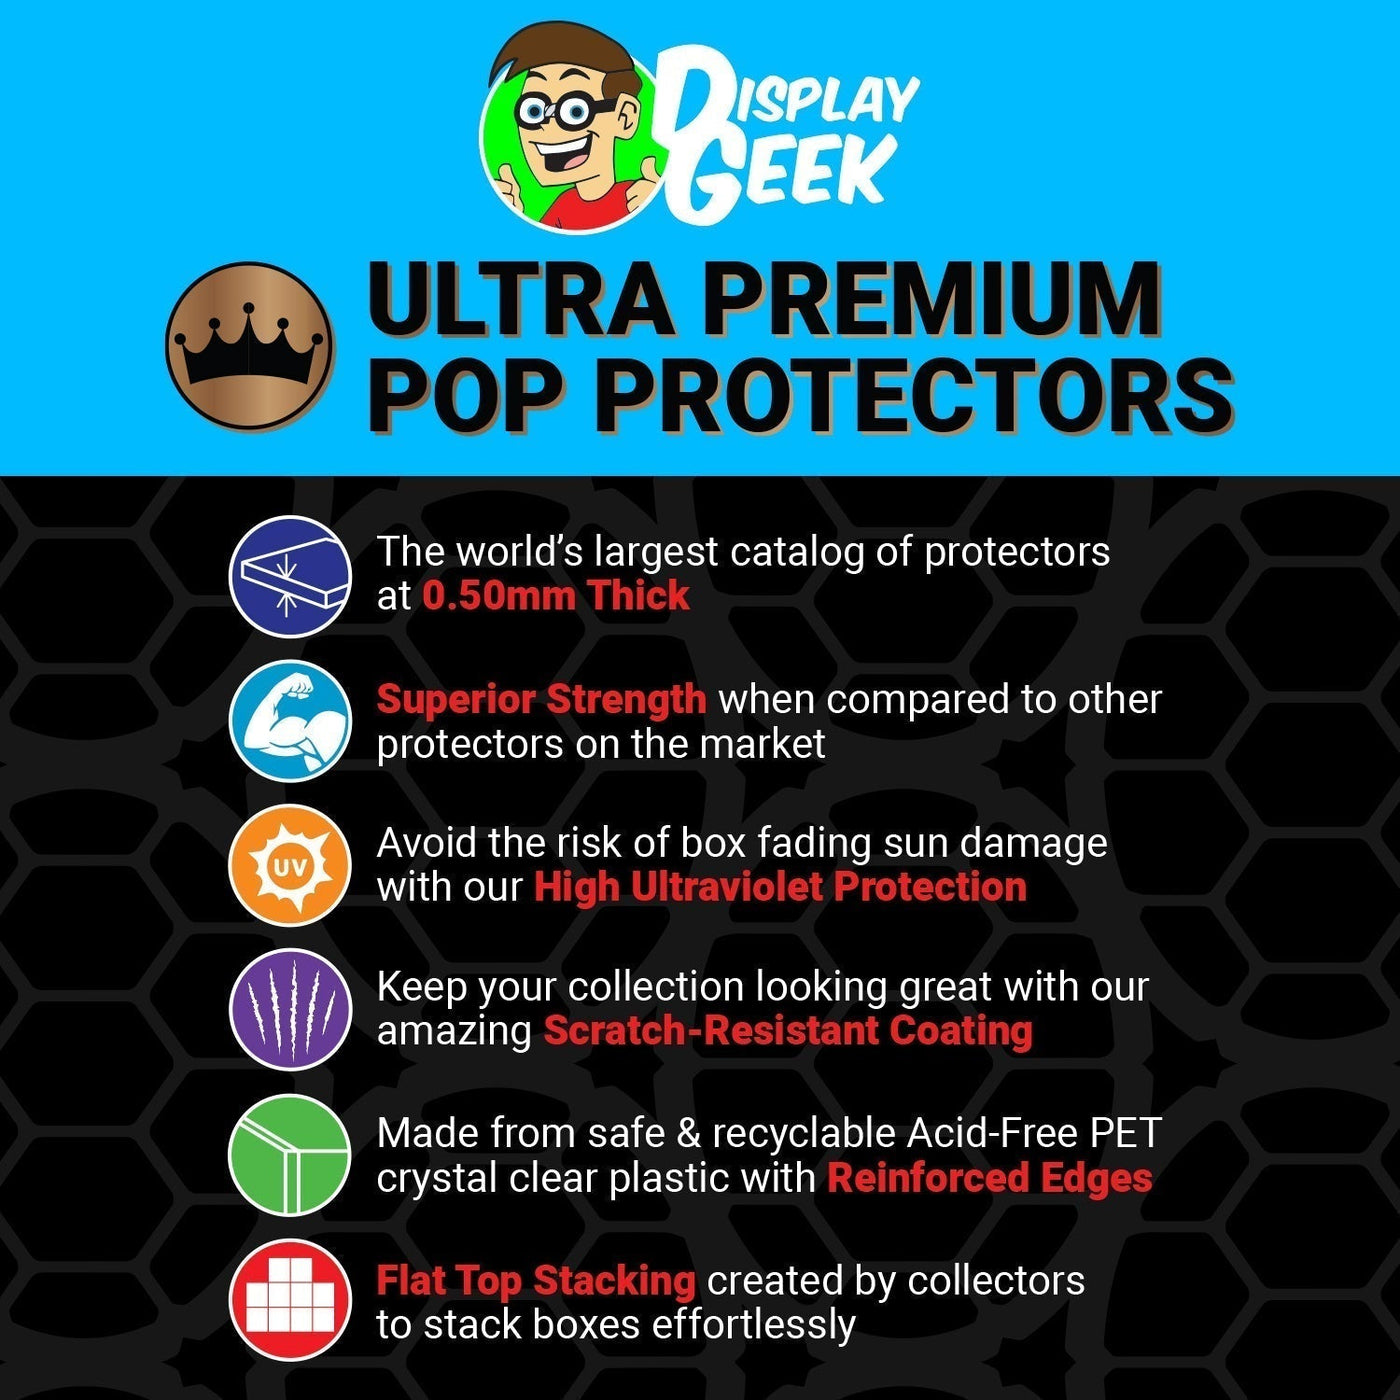 Pop Protector for 2 Pack Hamilton Laurens & Mulligan Funko Pop on The Protector Guide App by Display Geek